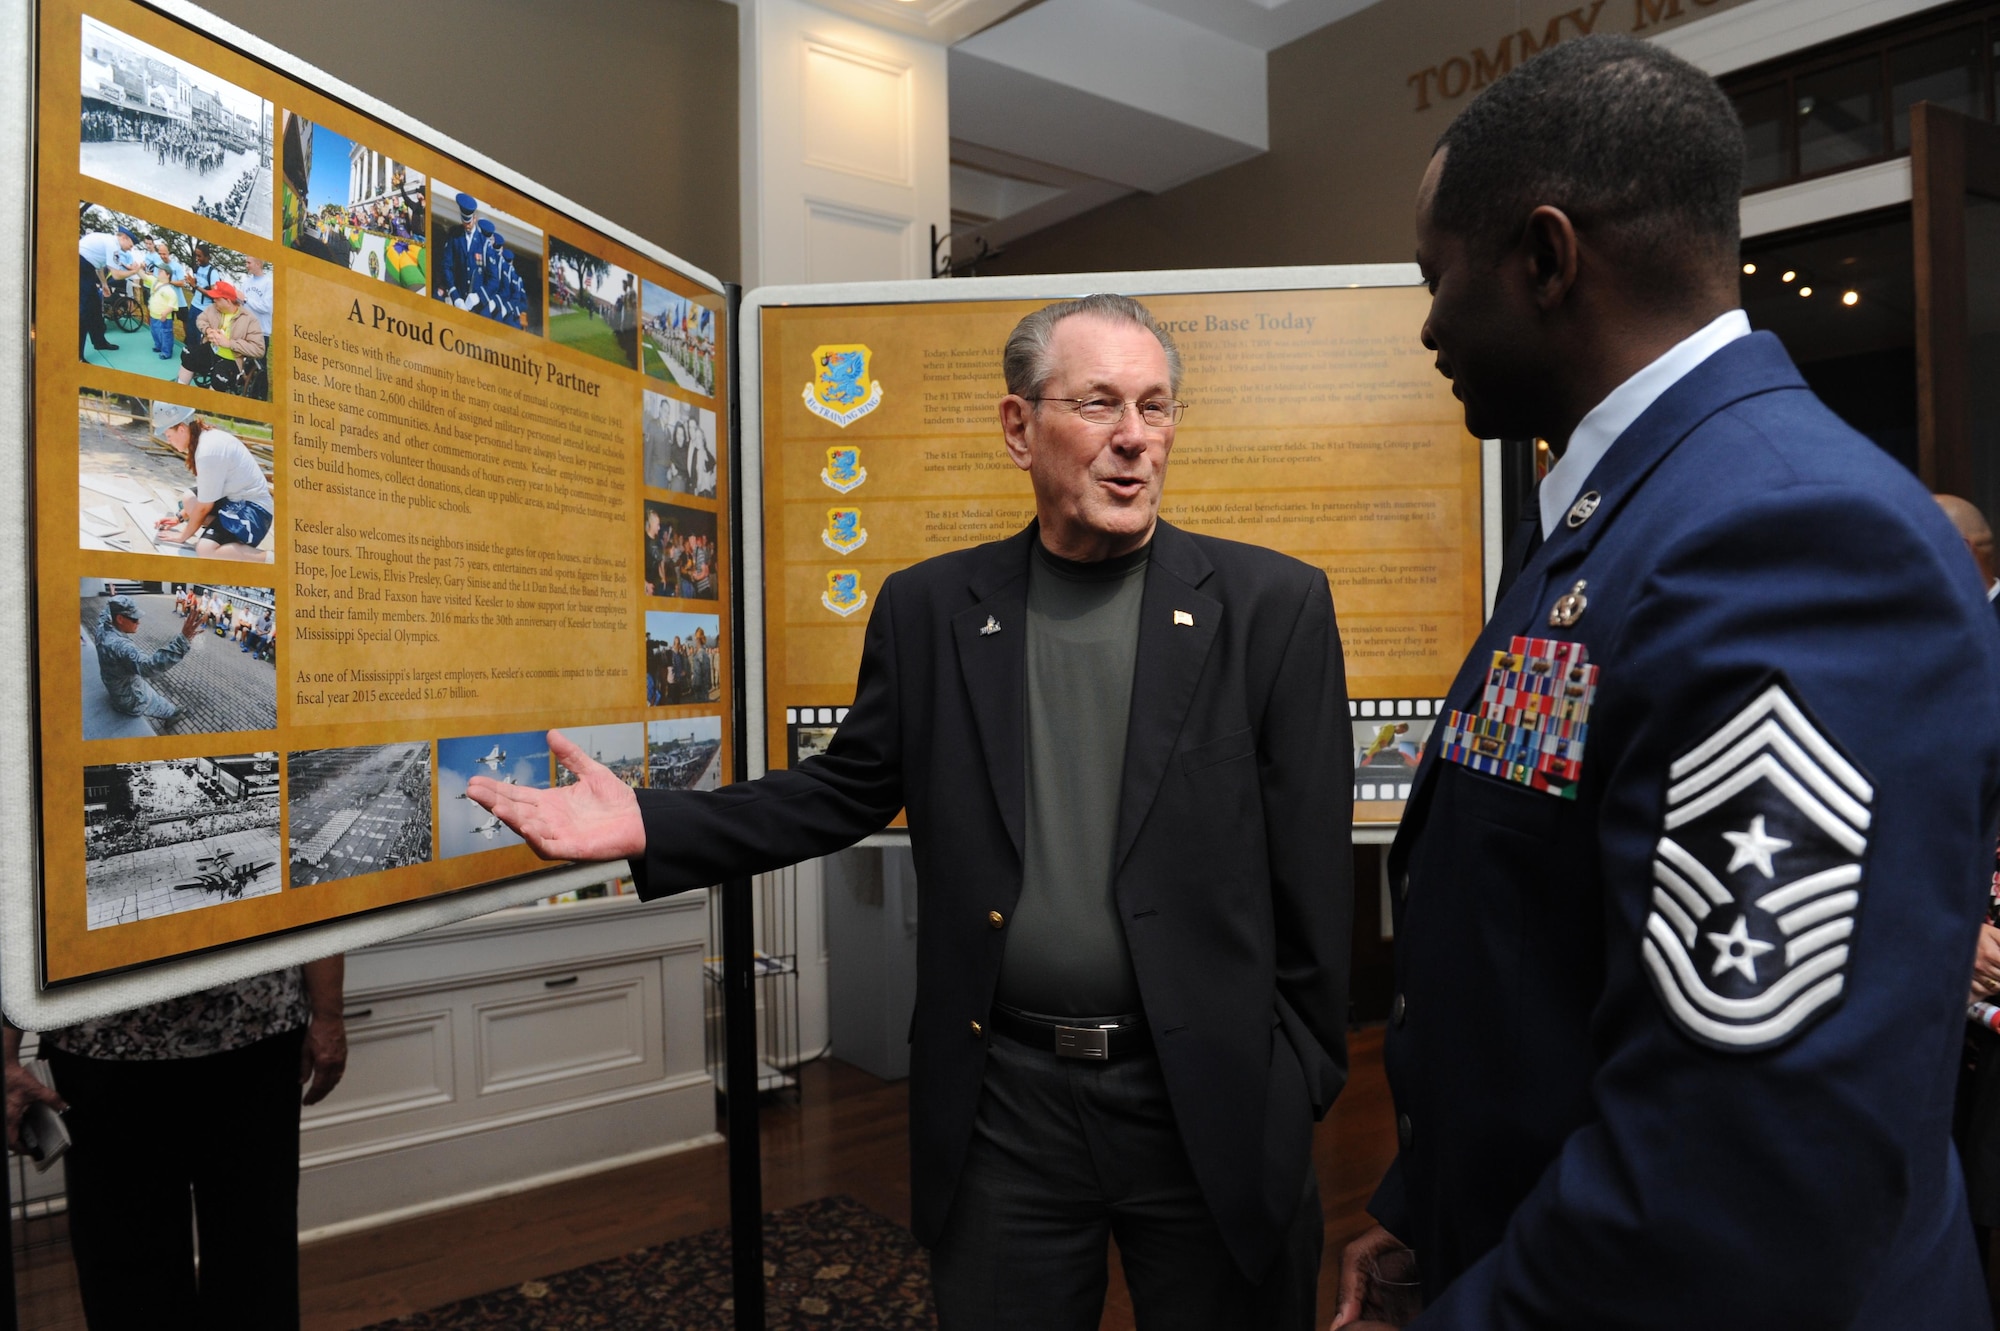 Retired Chief Master Sgt. J.J. Vollmuth and Chief Master Sgt. Harry Hutchinson, 81st Training Wing command chief, view the 14 panel historical display during Keesler’s 75th Anniversary Historical Display Unveiling at the Biloxi Visitors Center June 3, 2016, Biloxi, Miss. The newest 75th anniversary logo was also unveiled and Biloxi Mayor Andrew ‘FoFo’ Gilich read the “Biloxi/Keesler Partnership Day” proclamation. (U.S. Air Force photo by Kemberly Groue)